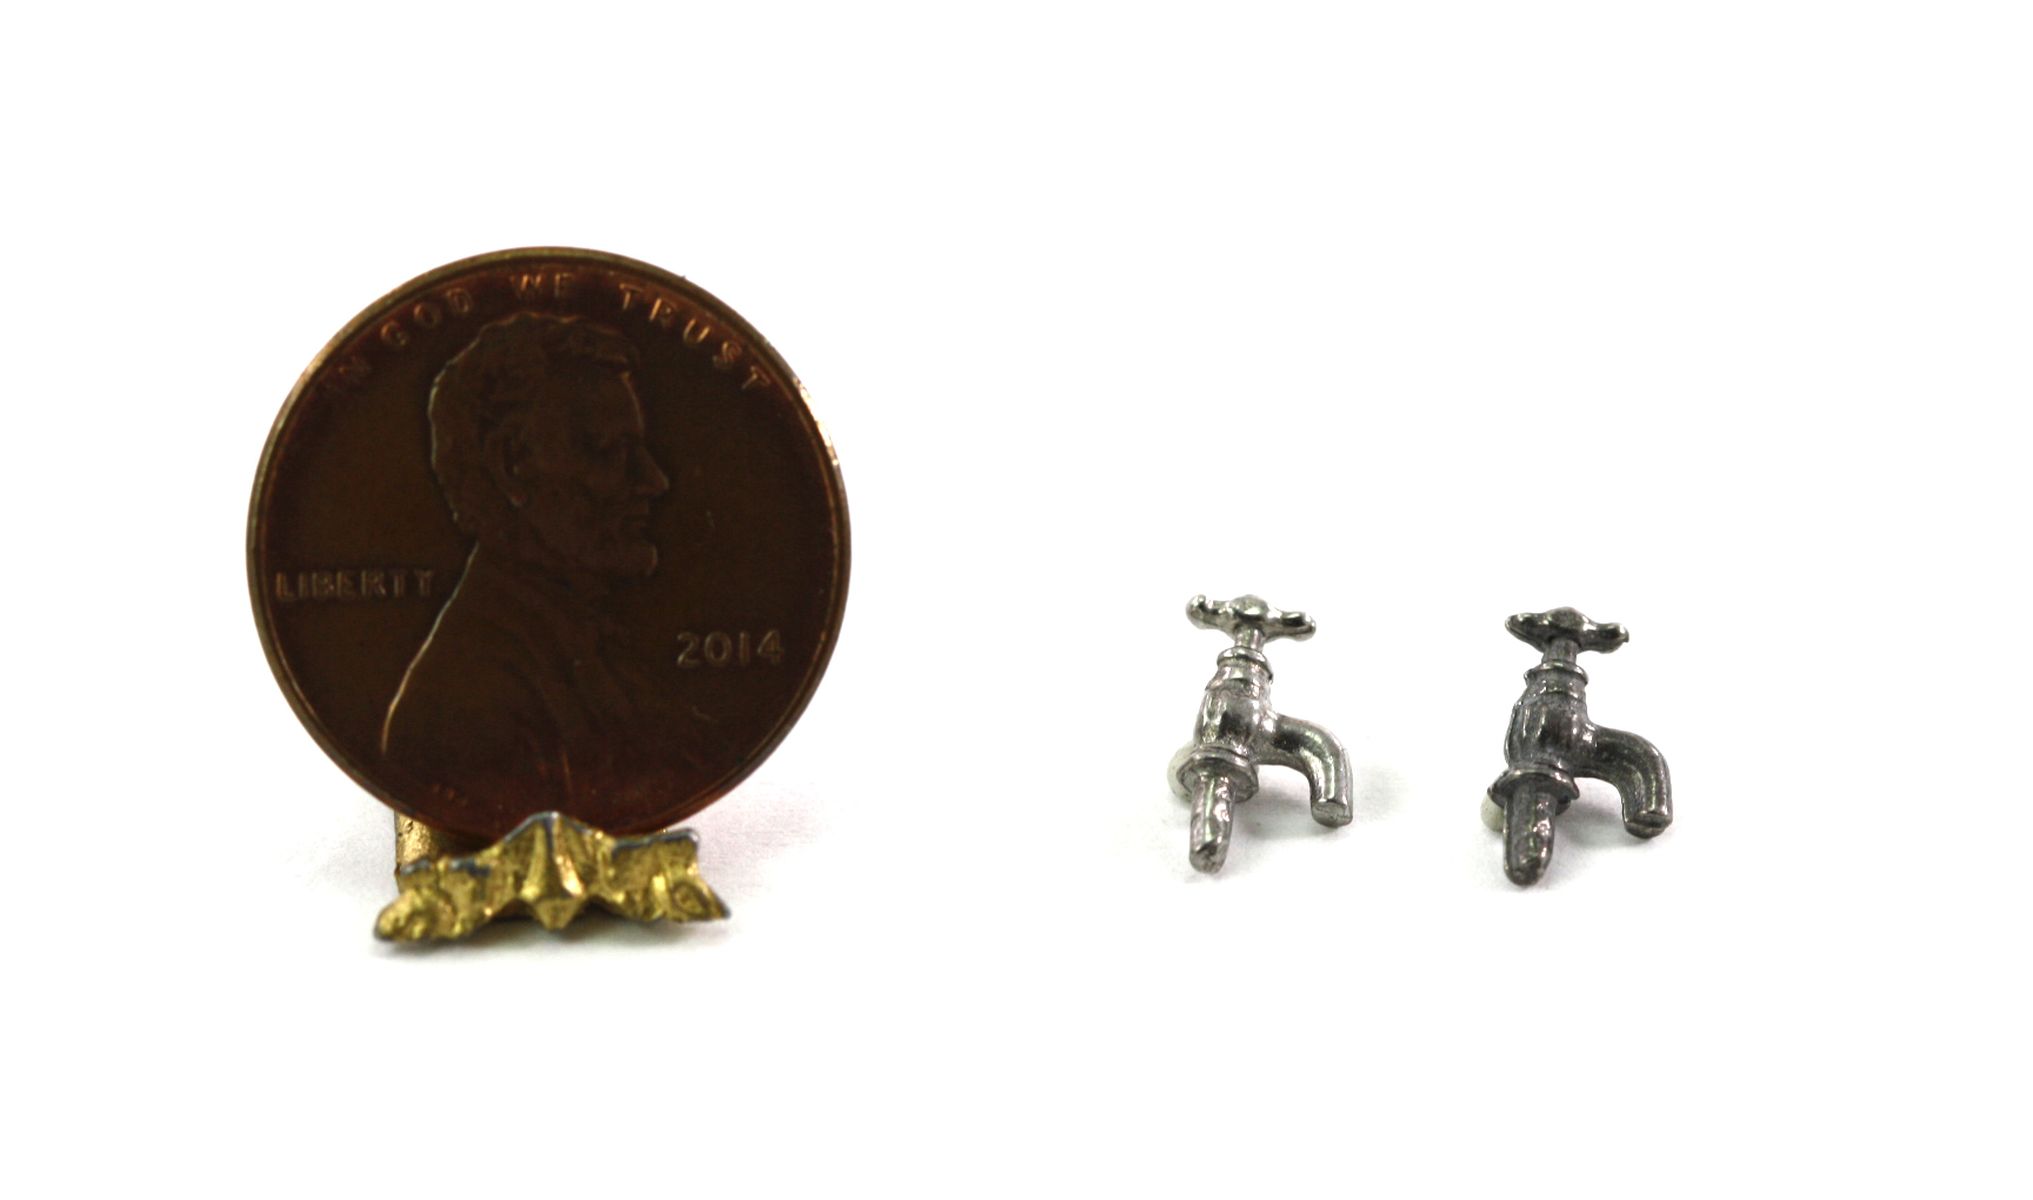 Upright Taps in Polished Metal 1:24 Scale by Phoenix Models